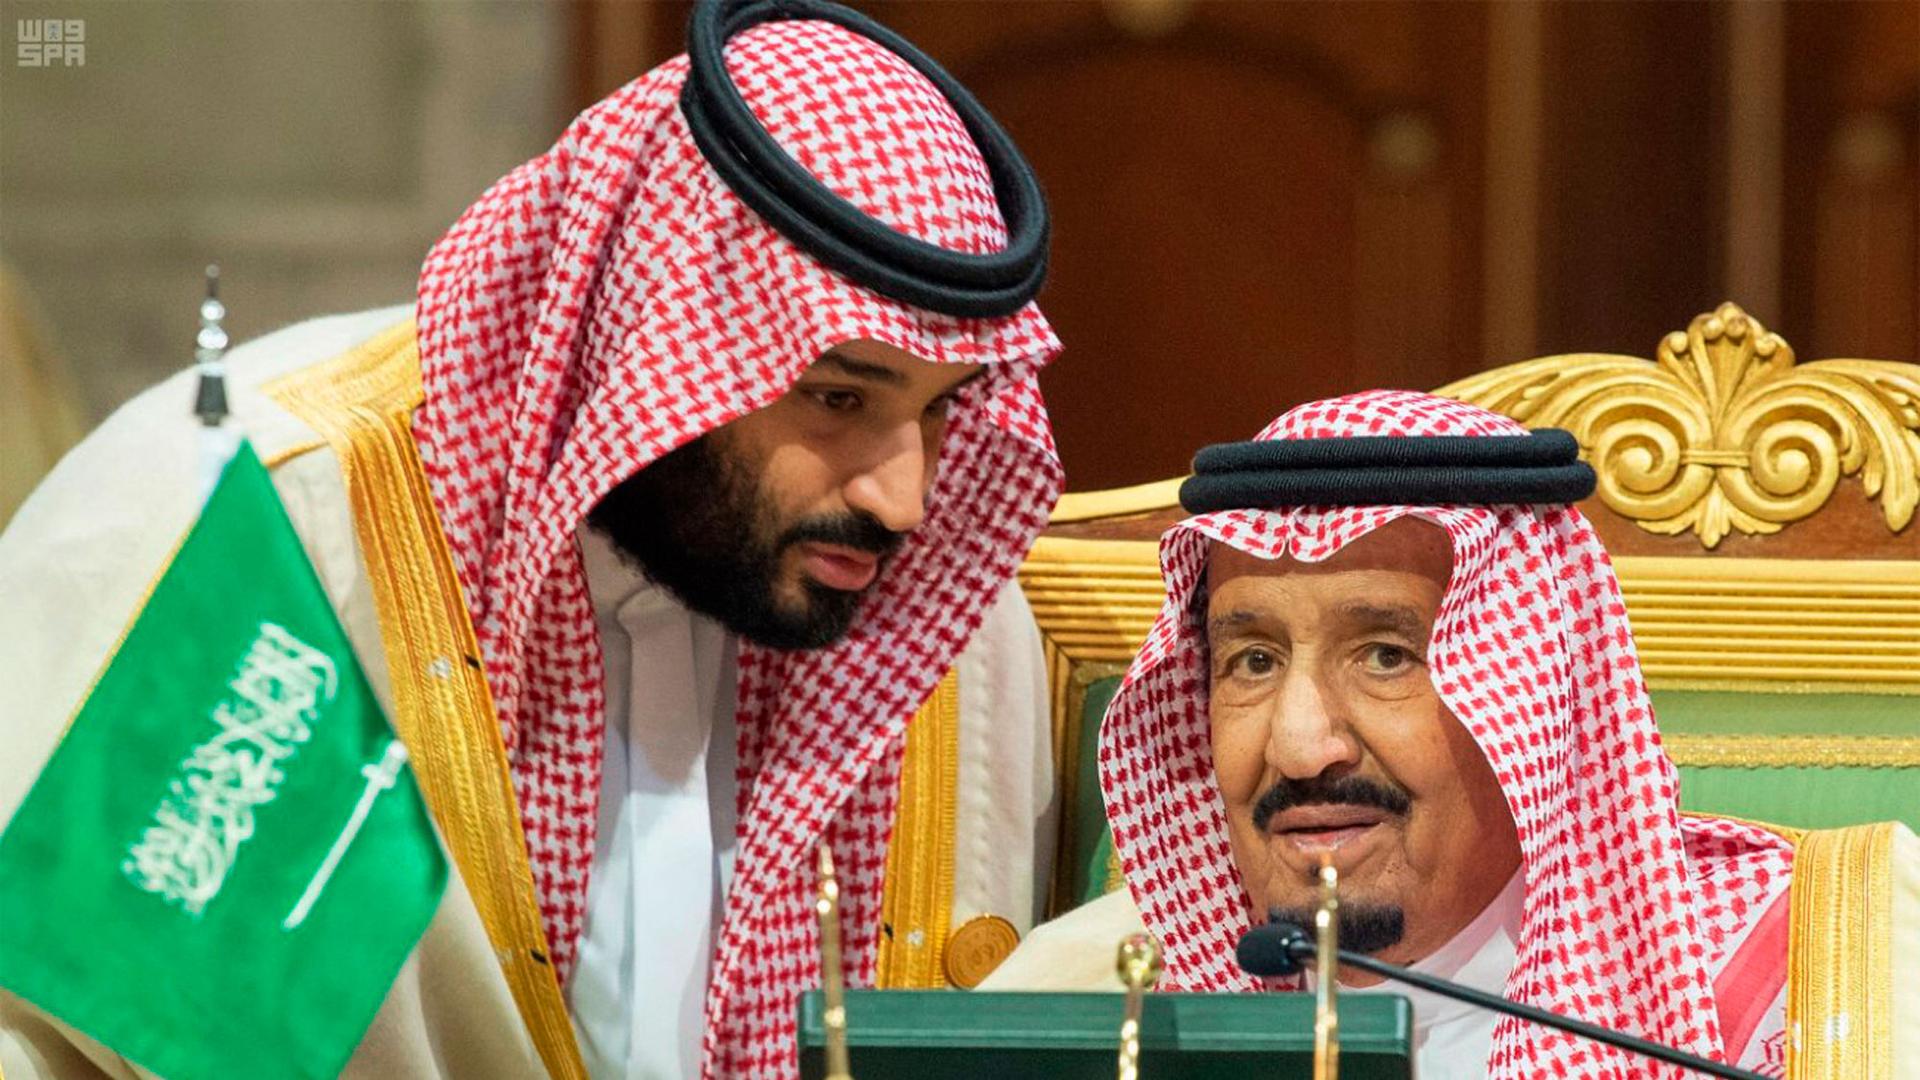 In this photo released by the state-run Saudi Press Agency, Saudi Crown Prince Mohamed bin Salman, left, speaks with his father, King Salman, right, at a meeting of the Cooperation Council for the Arab States of the Gulf in Riyadh, Saudi Arabia.